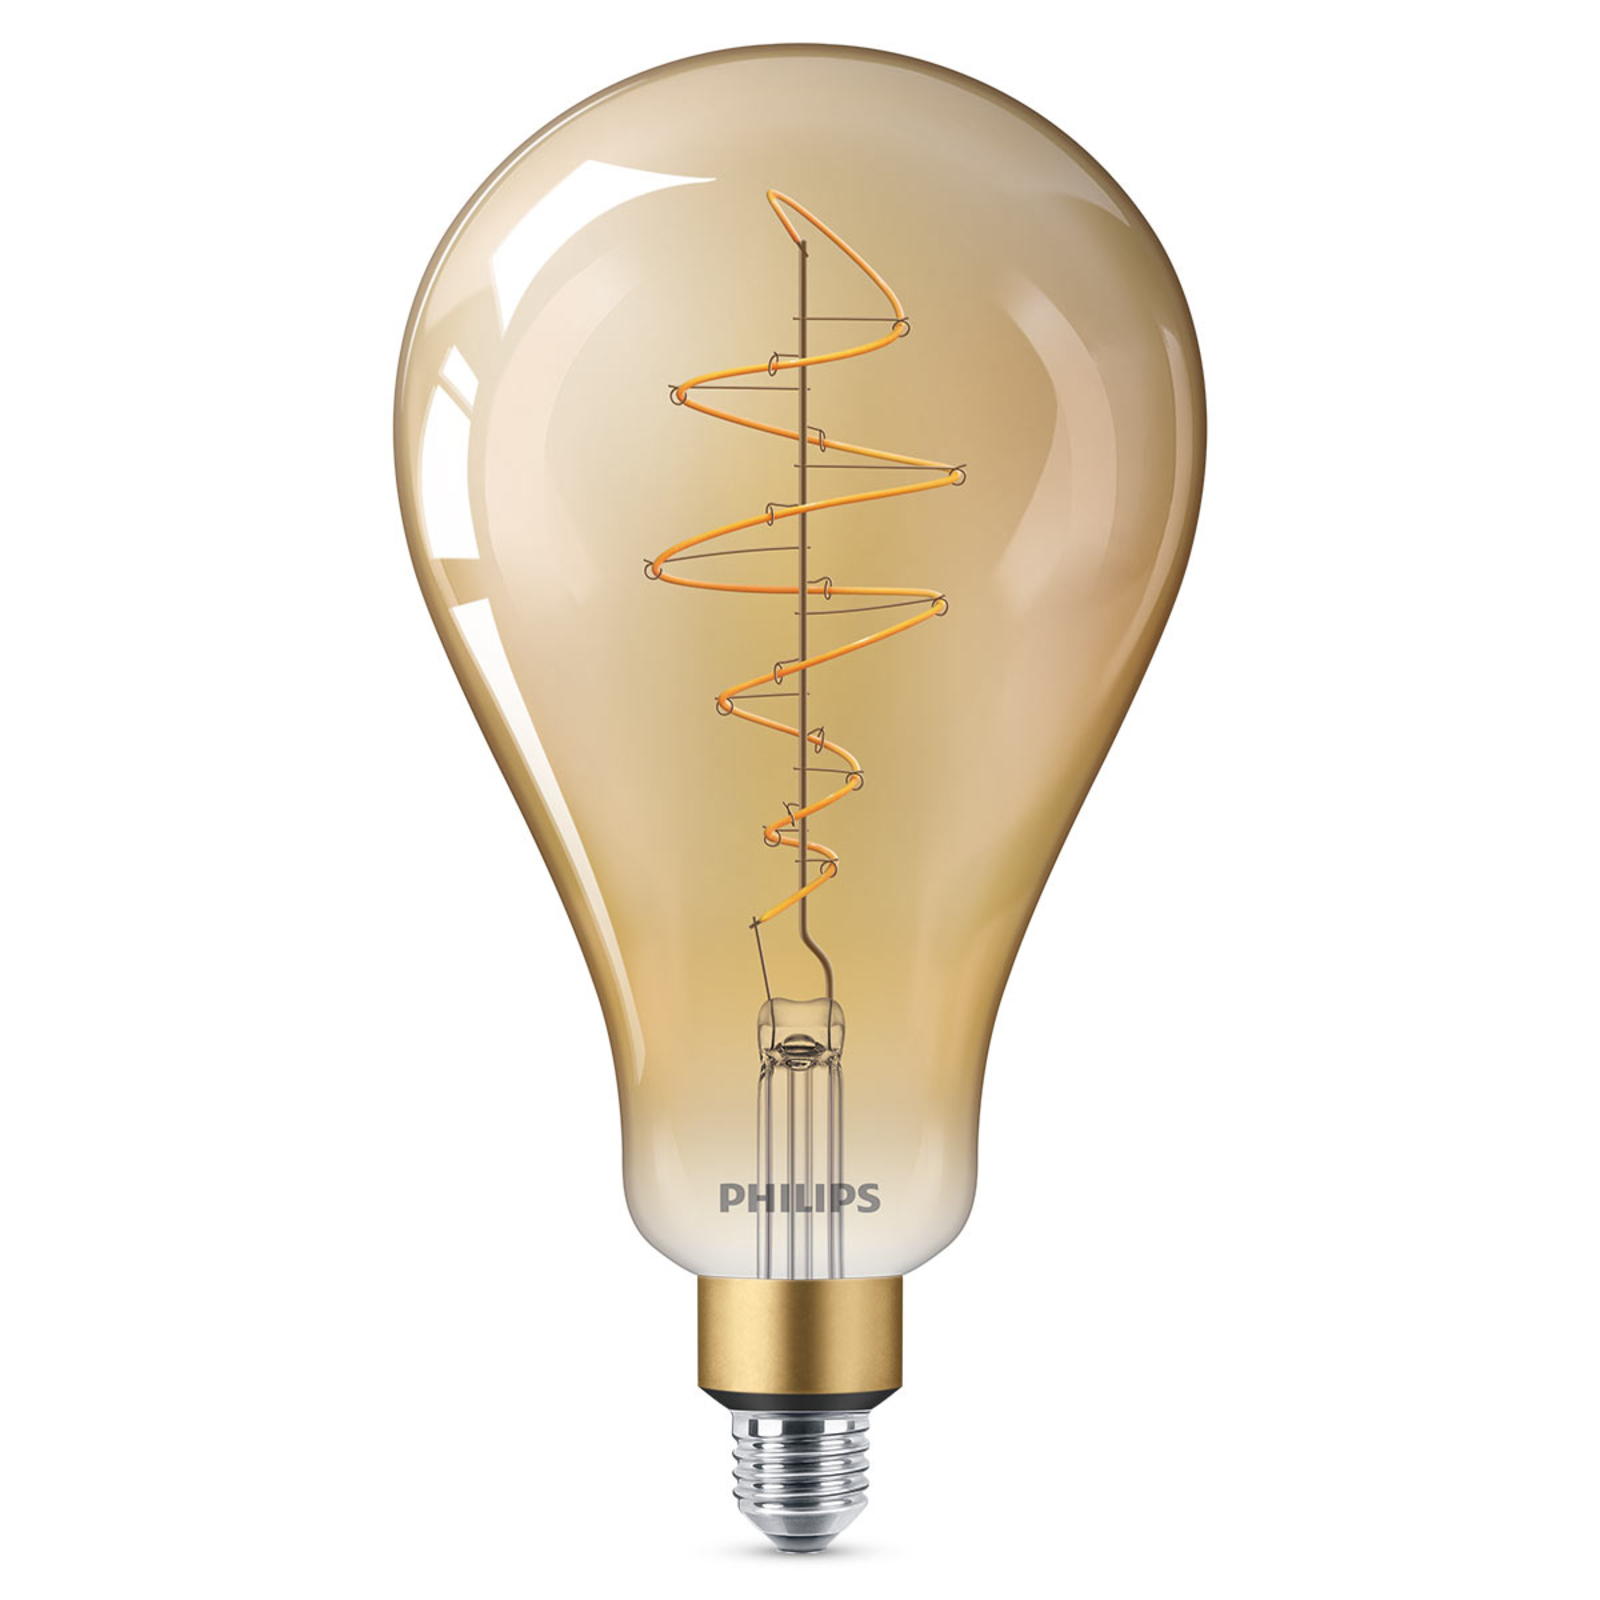 Philips E27 Giant LED-Lampe 7W gold dimmbar